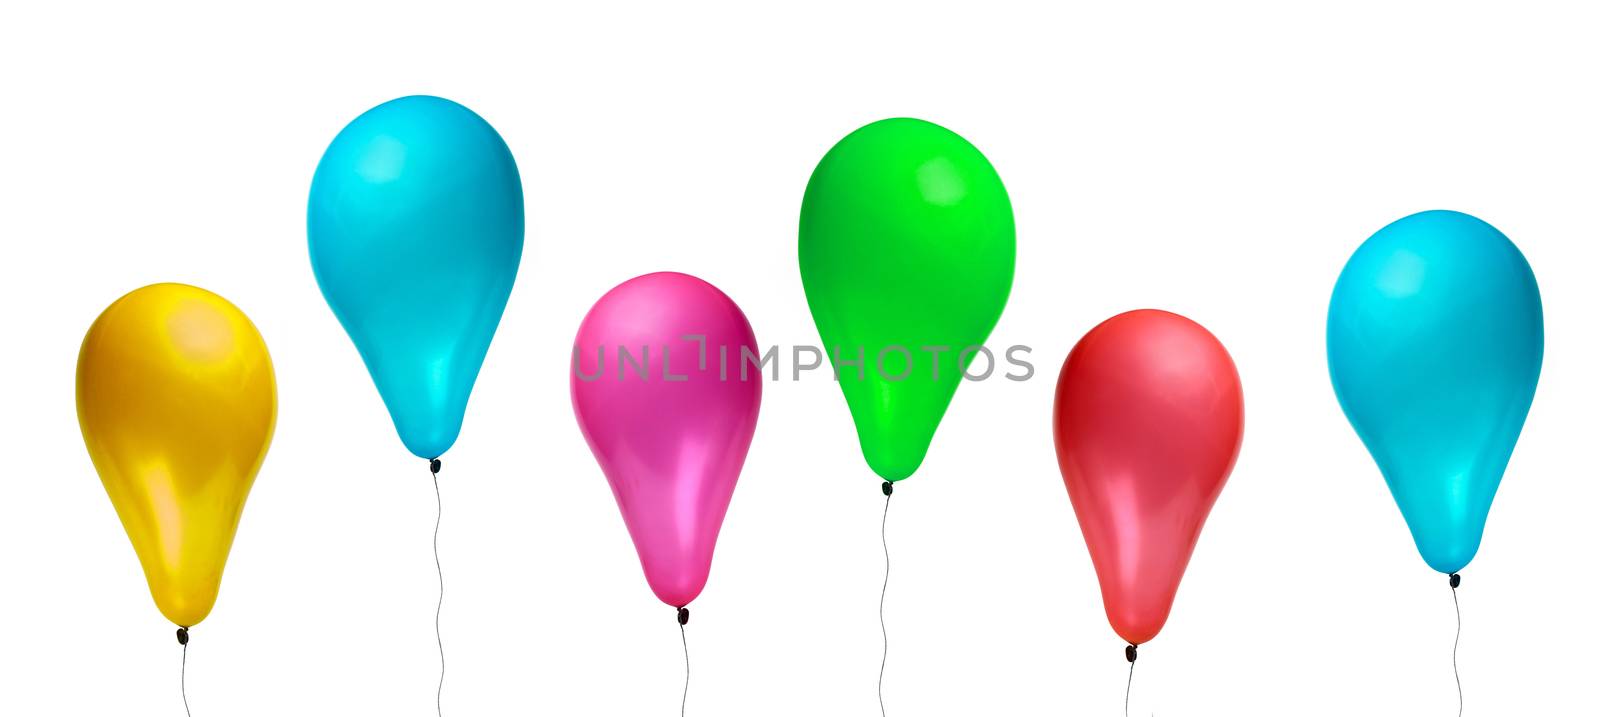 balloons isolated on white by ozaiachin